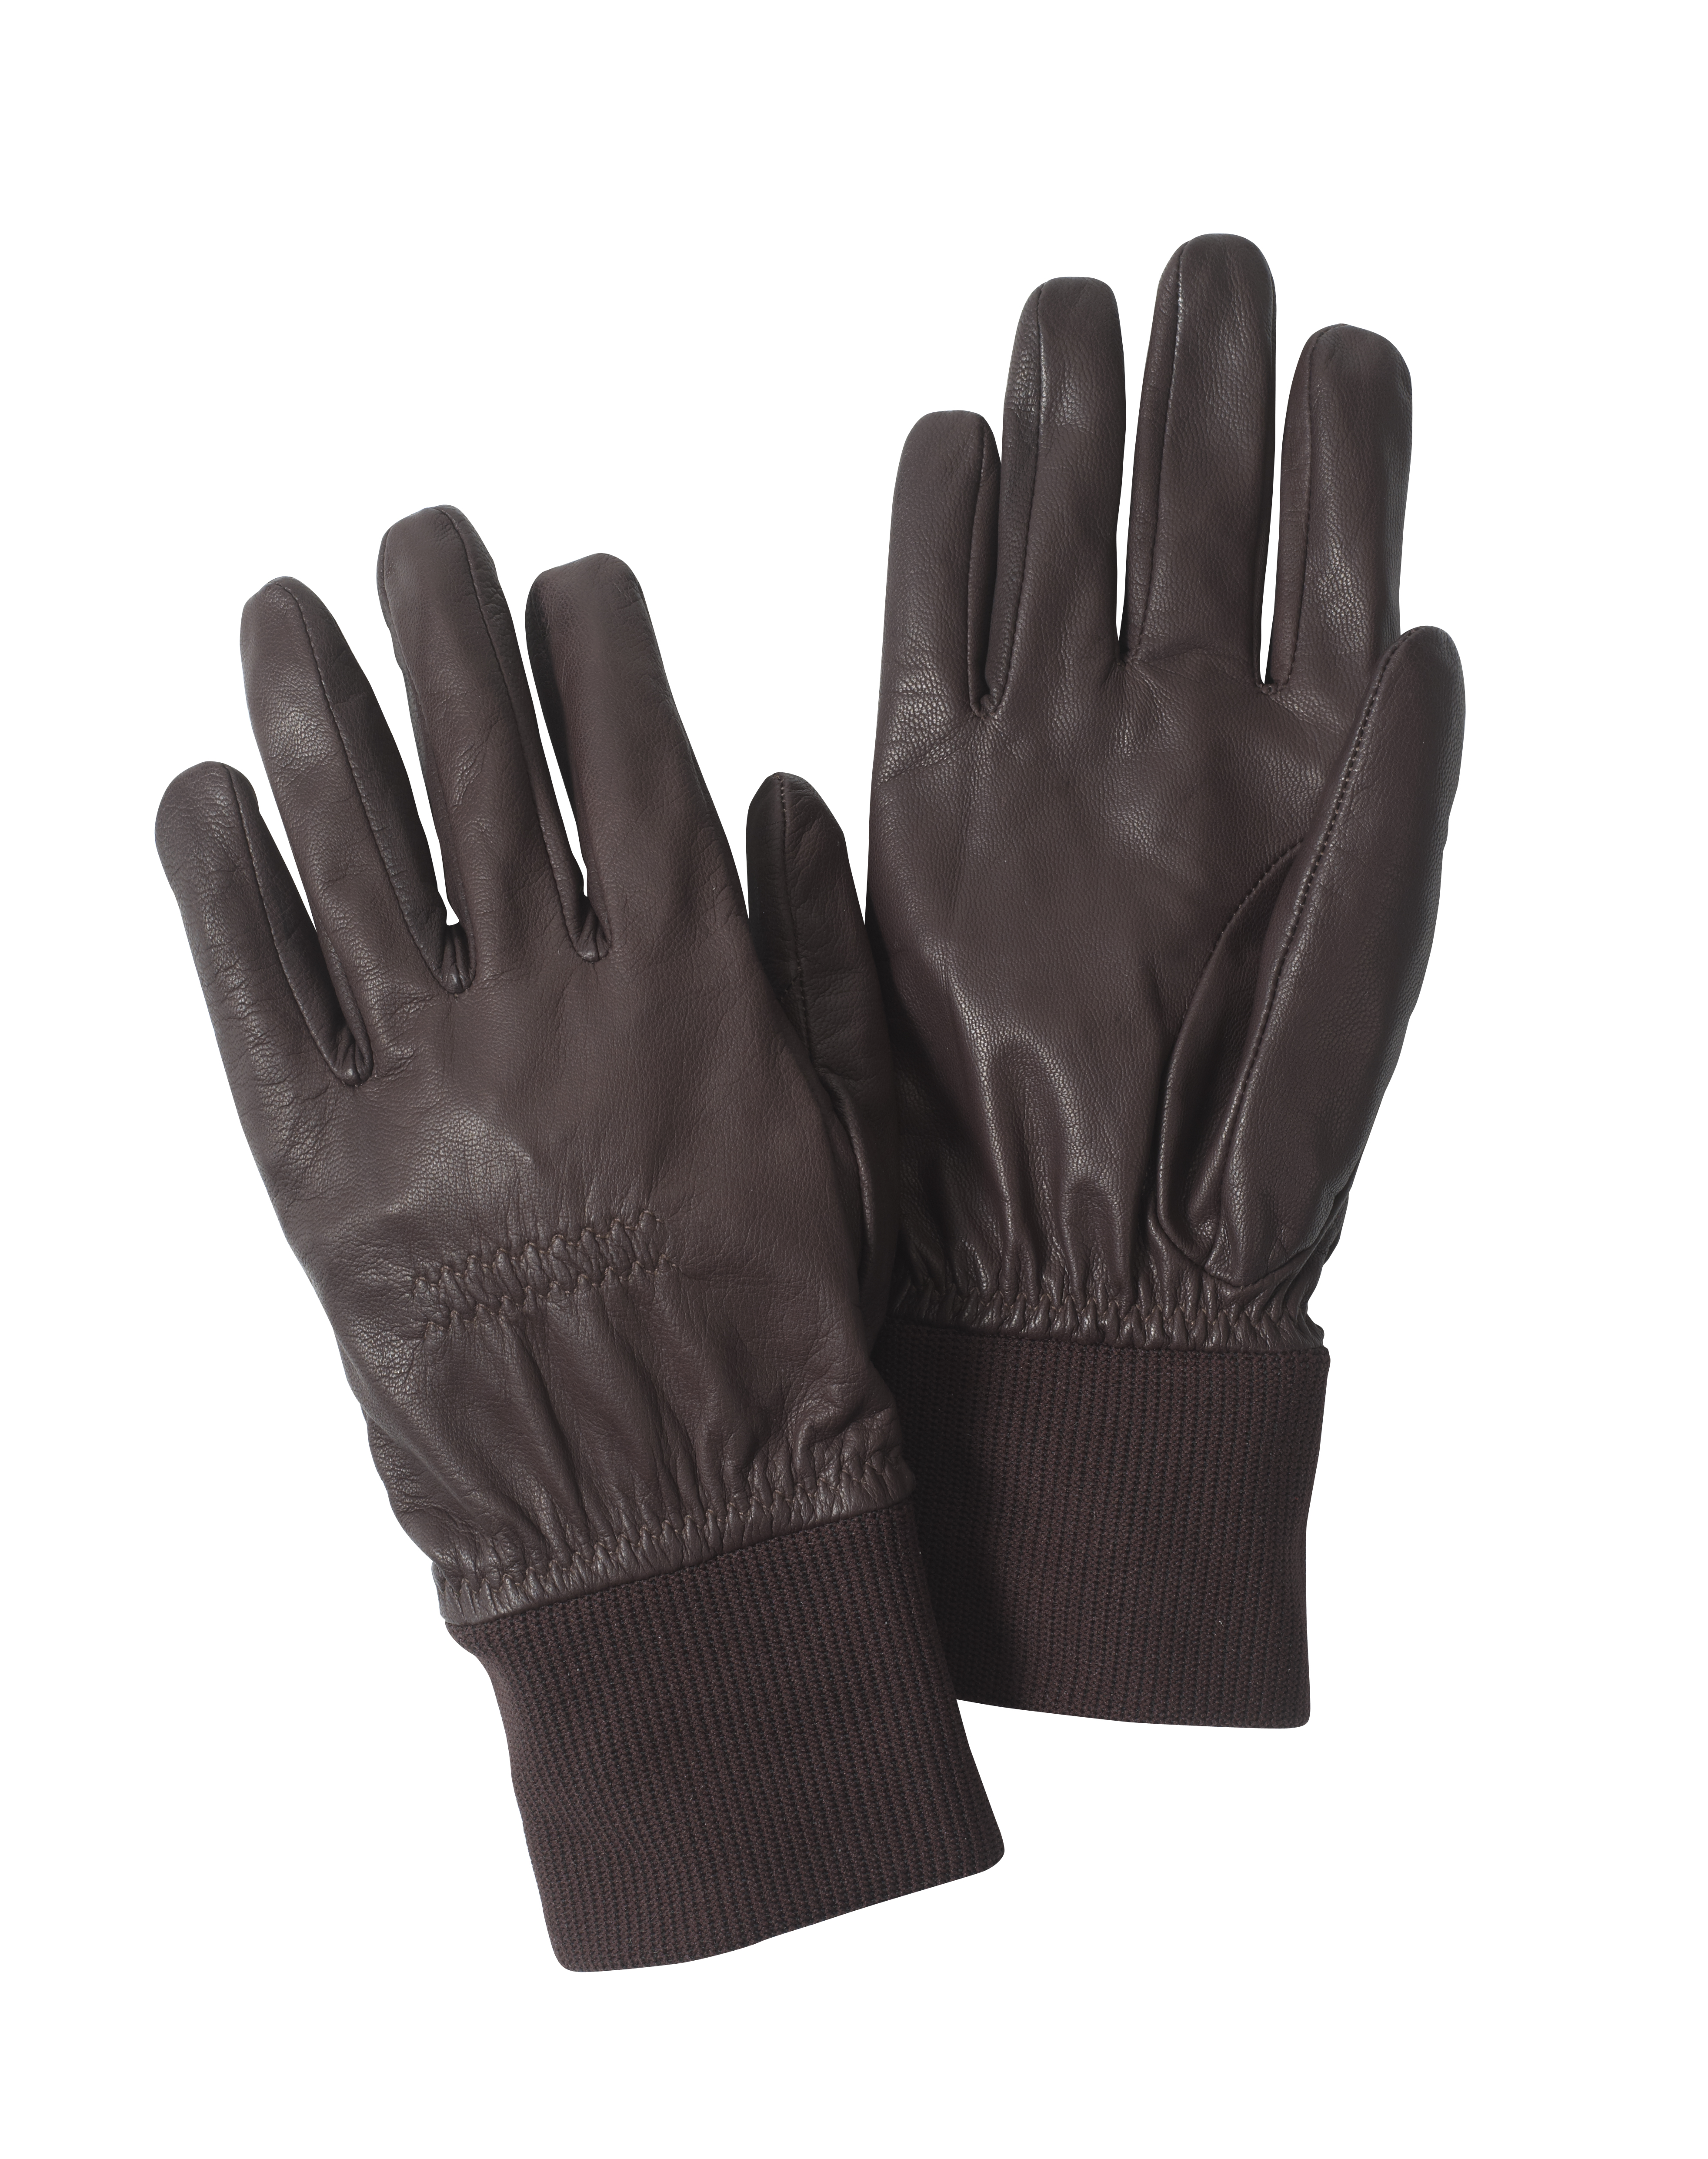 Musto Leather Shooting Gloves-Brown